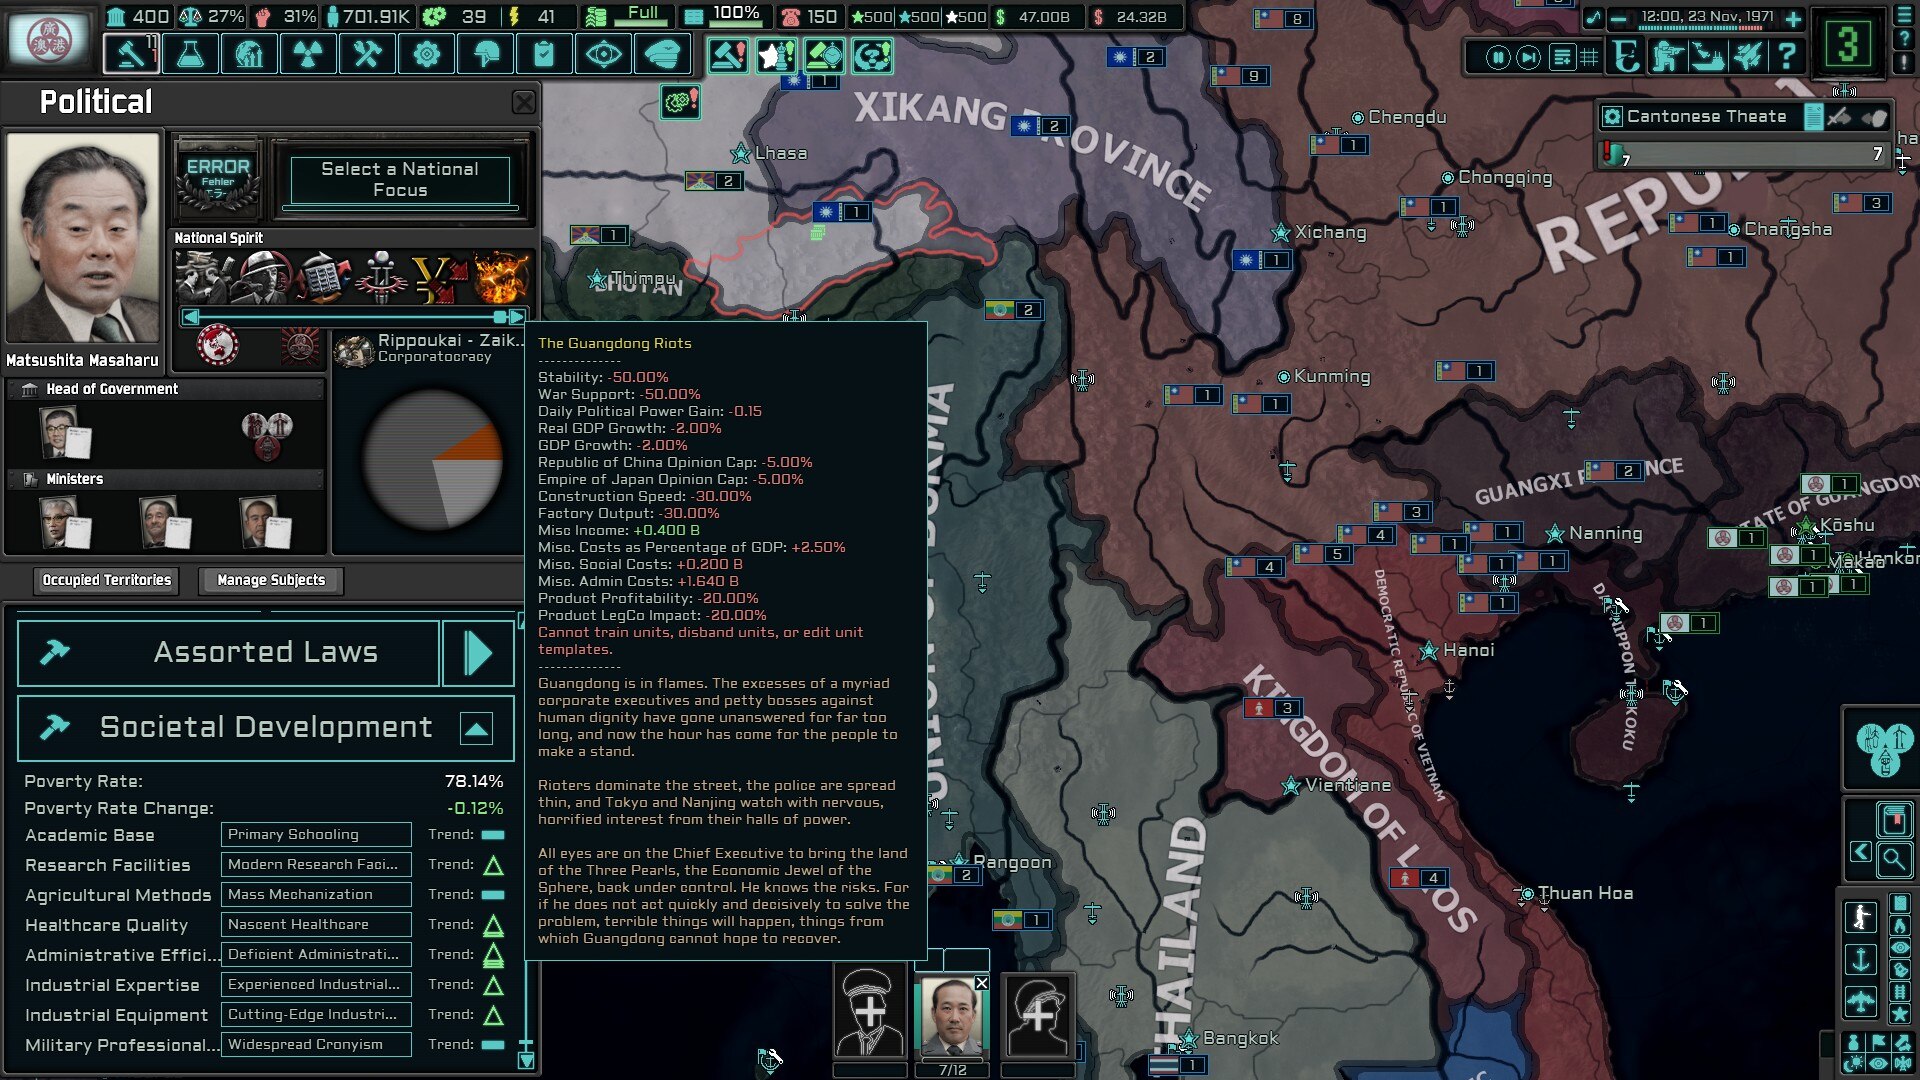 Conduct mod development for paradox hearts of iron iv by Nikitasandstrom